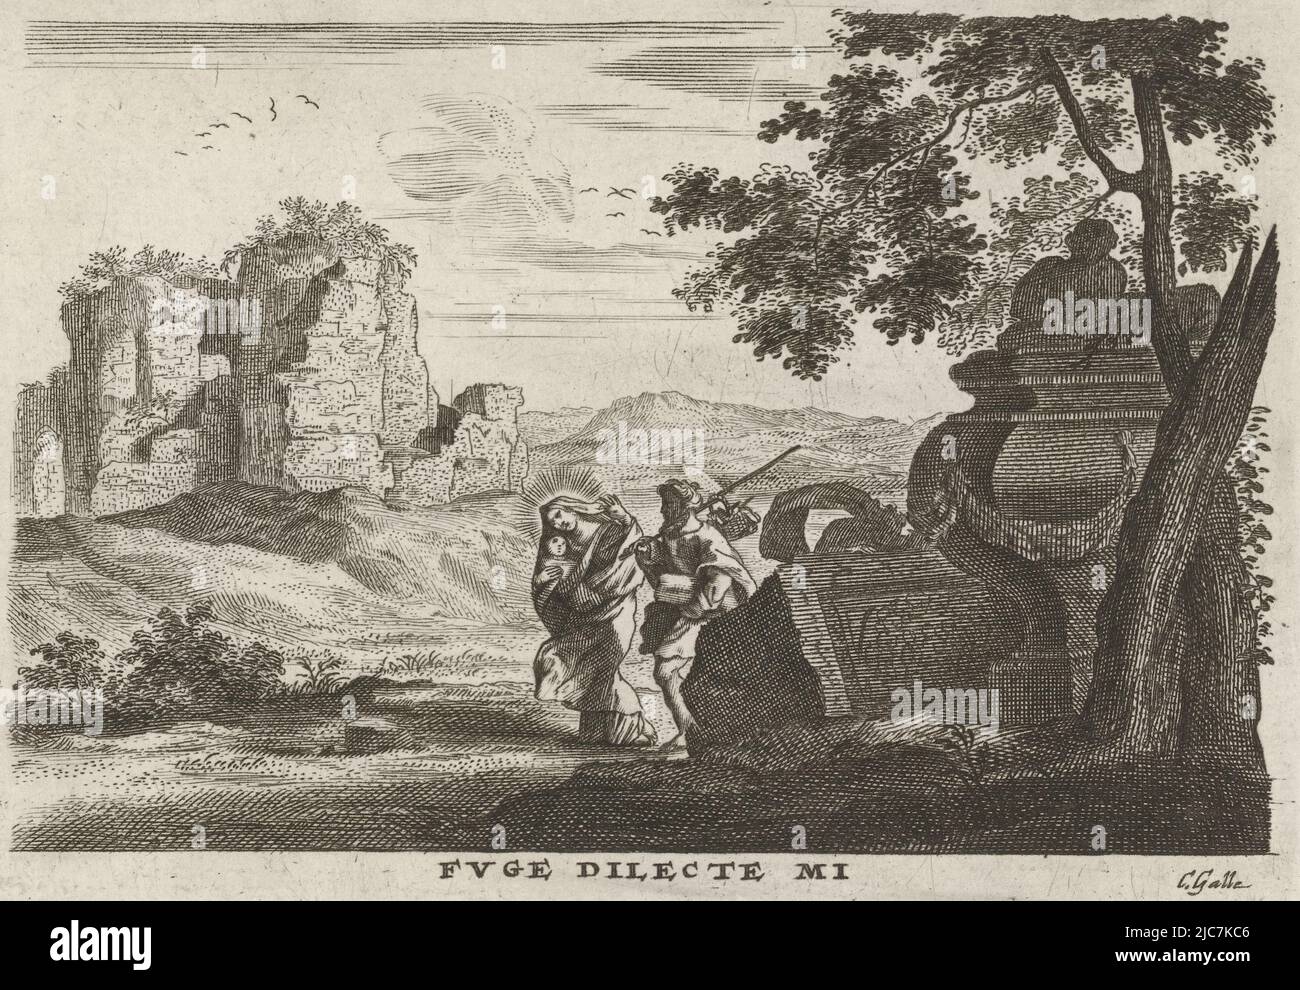 Mary and Joseph and the Christ Child walking through a landscape of Roman ruins on their way to Egypt, Holy Family on foot fleeing to Egypt, print maker: Cornelis Galle (II), (mentioned on object), print maker: Cornelis Galle (III), (mentioned on object), Antwerp, 1638 - 1678, paper, engraving, h 93 mm × w 133 mm Stock Photo